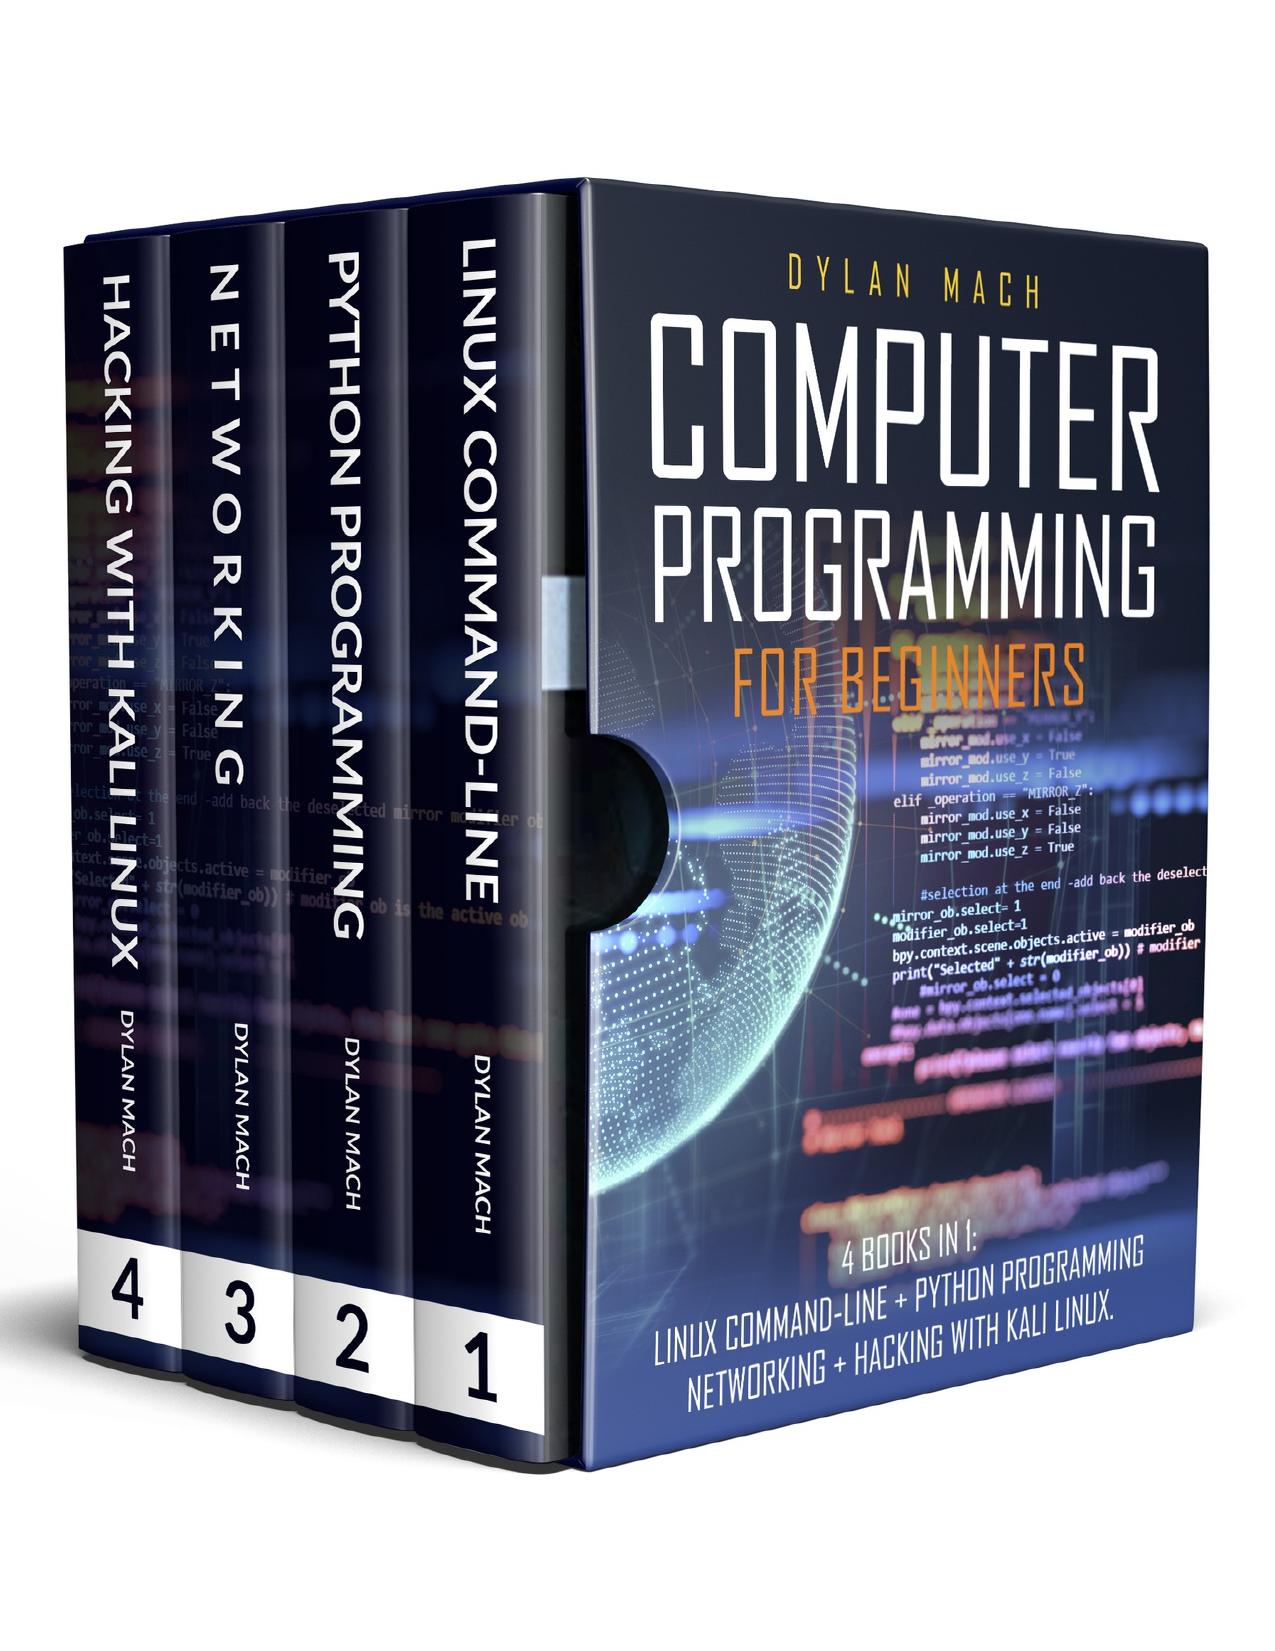 Computer Programming for Beginners 4 Books in 1. Linux Command-Line + Python Programming + Networking + Hacking with Kali Linux. Cybersecurity, Wireless, Lte, Networks, and Penetration Testing